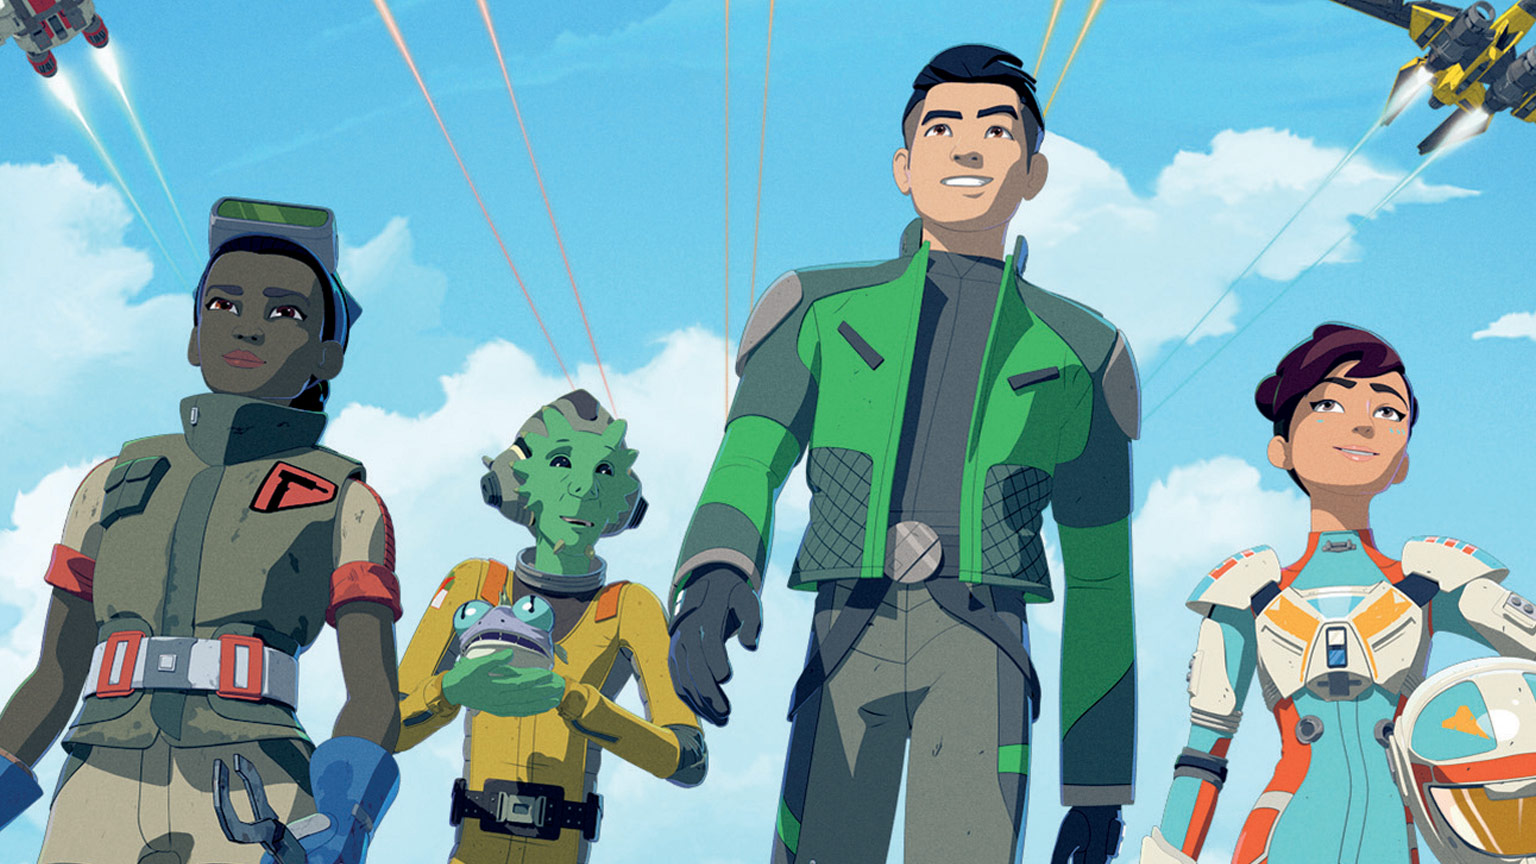 How Do You Feel about Star Wars Resistance?